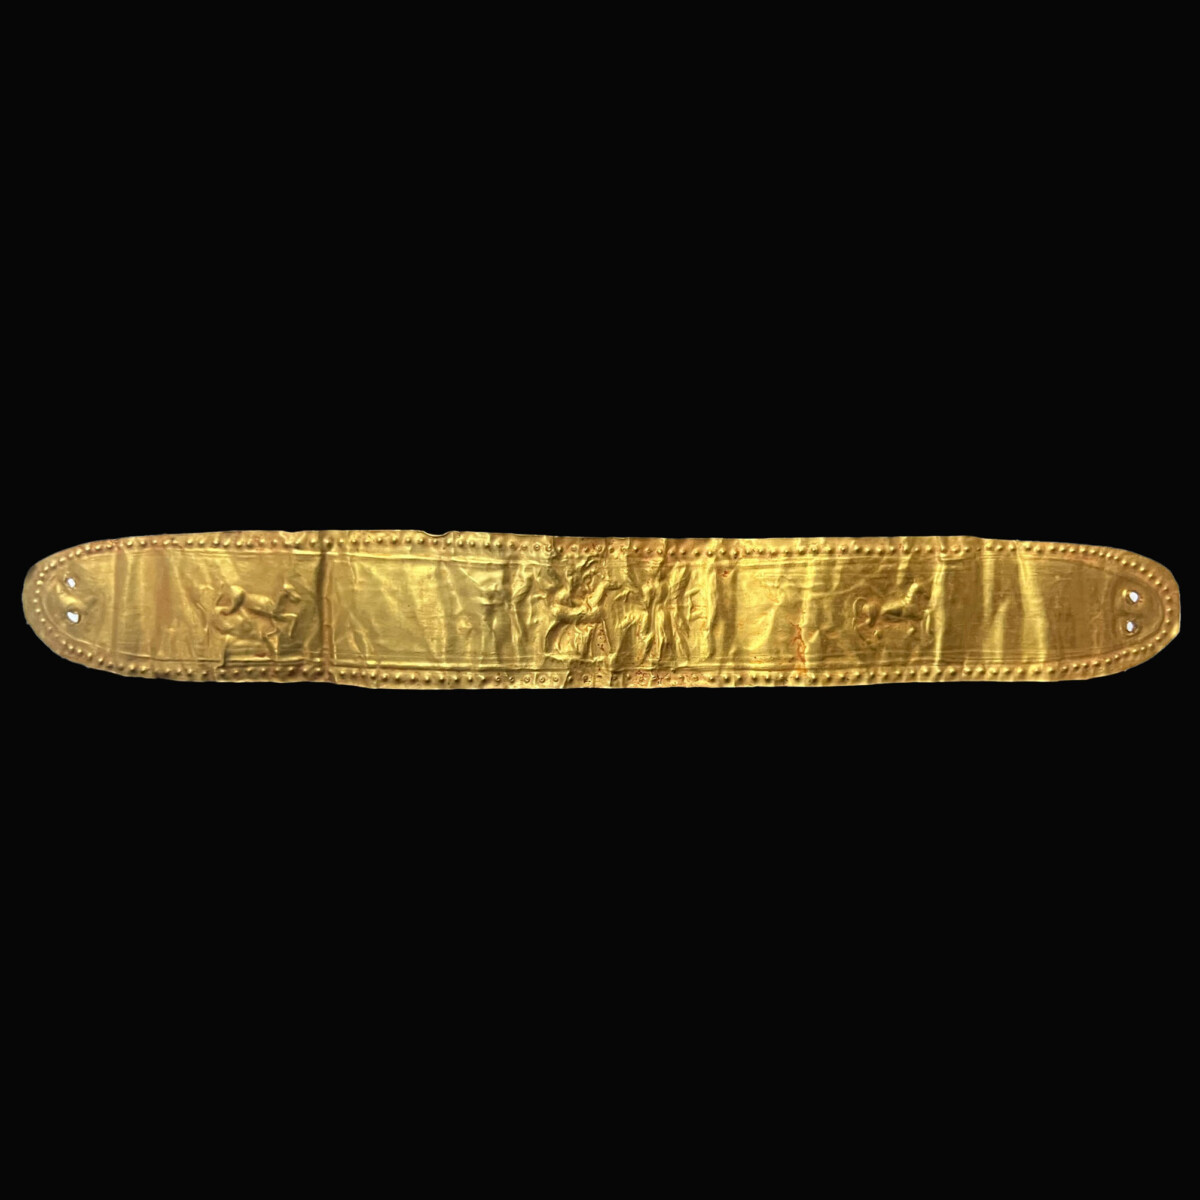 Hellenistic gold diadem with winged goddess